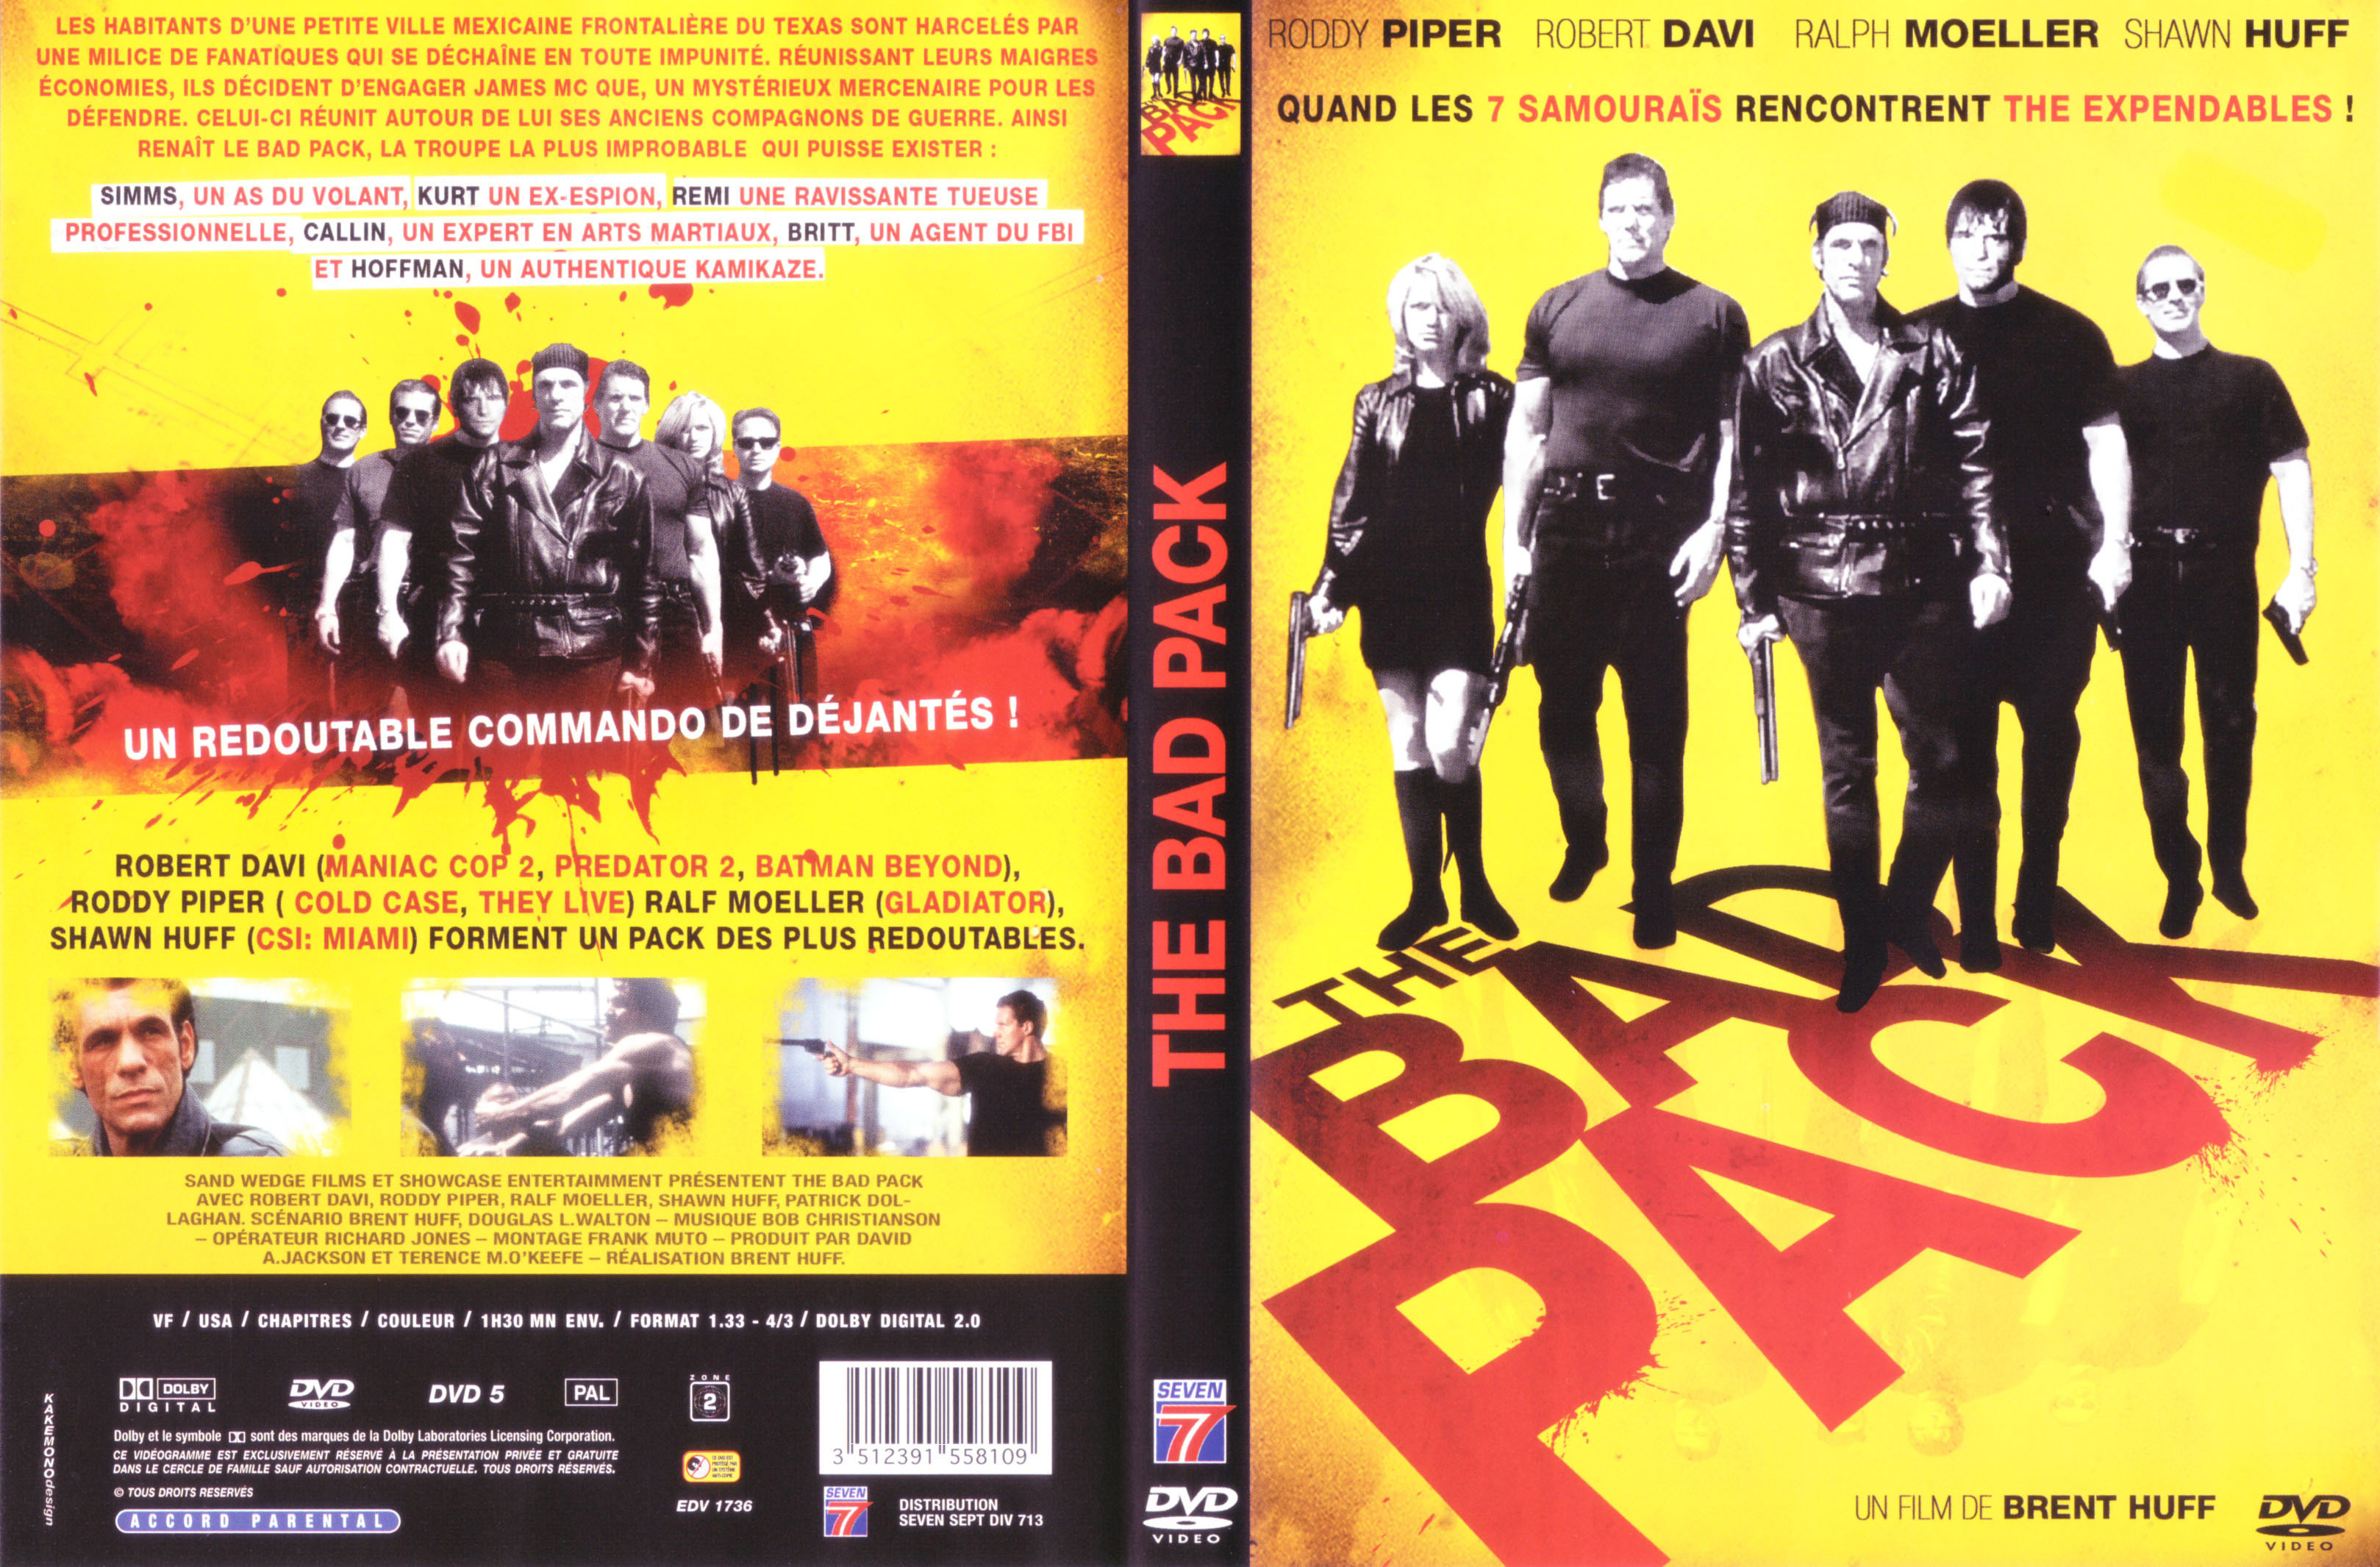 Jaquette DVD The bad pack